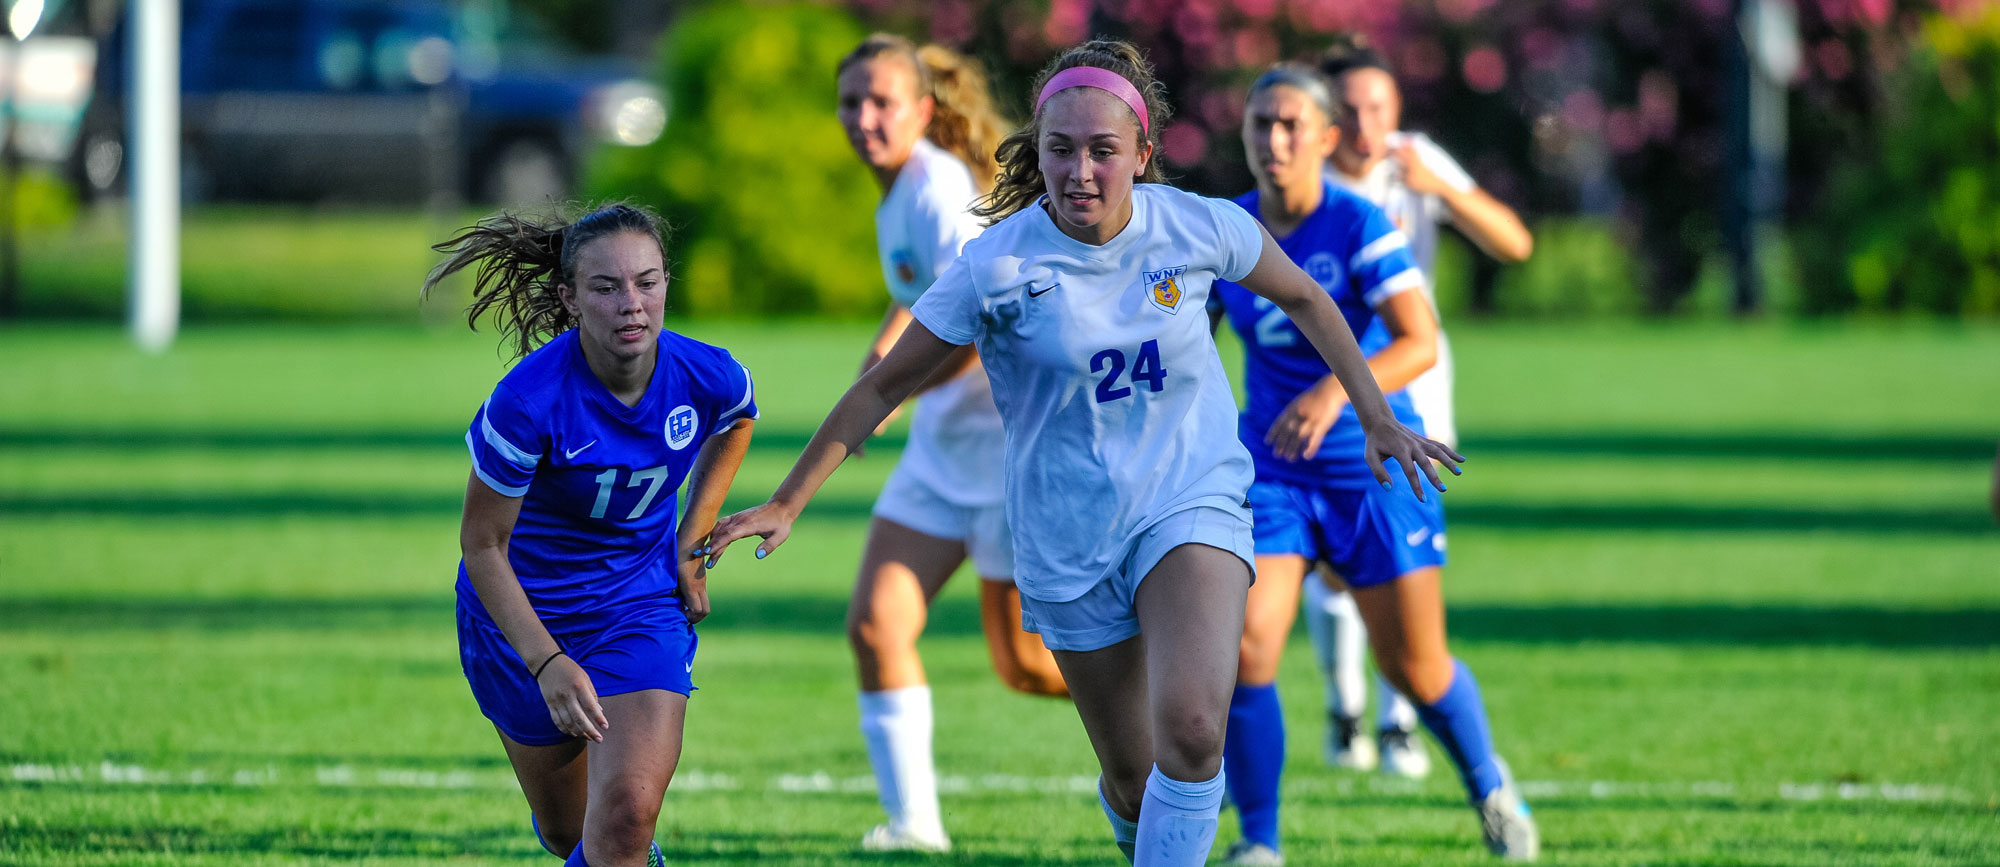 Western New England Erupts Offensively in 5-0 Victory Over Maine-Presque Isle